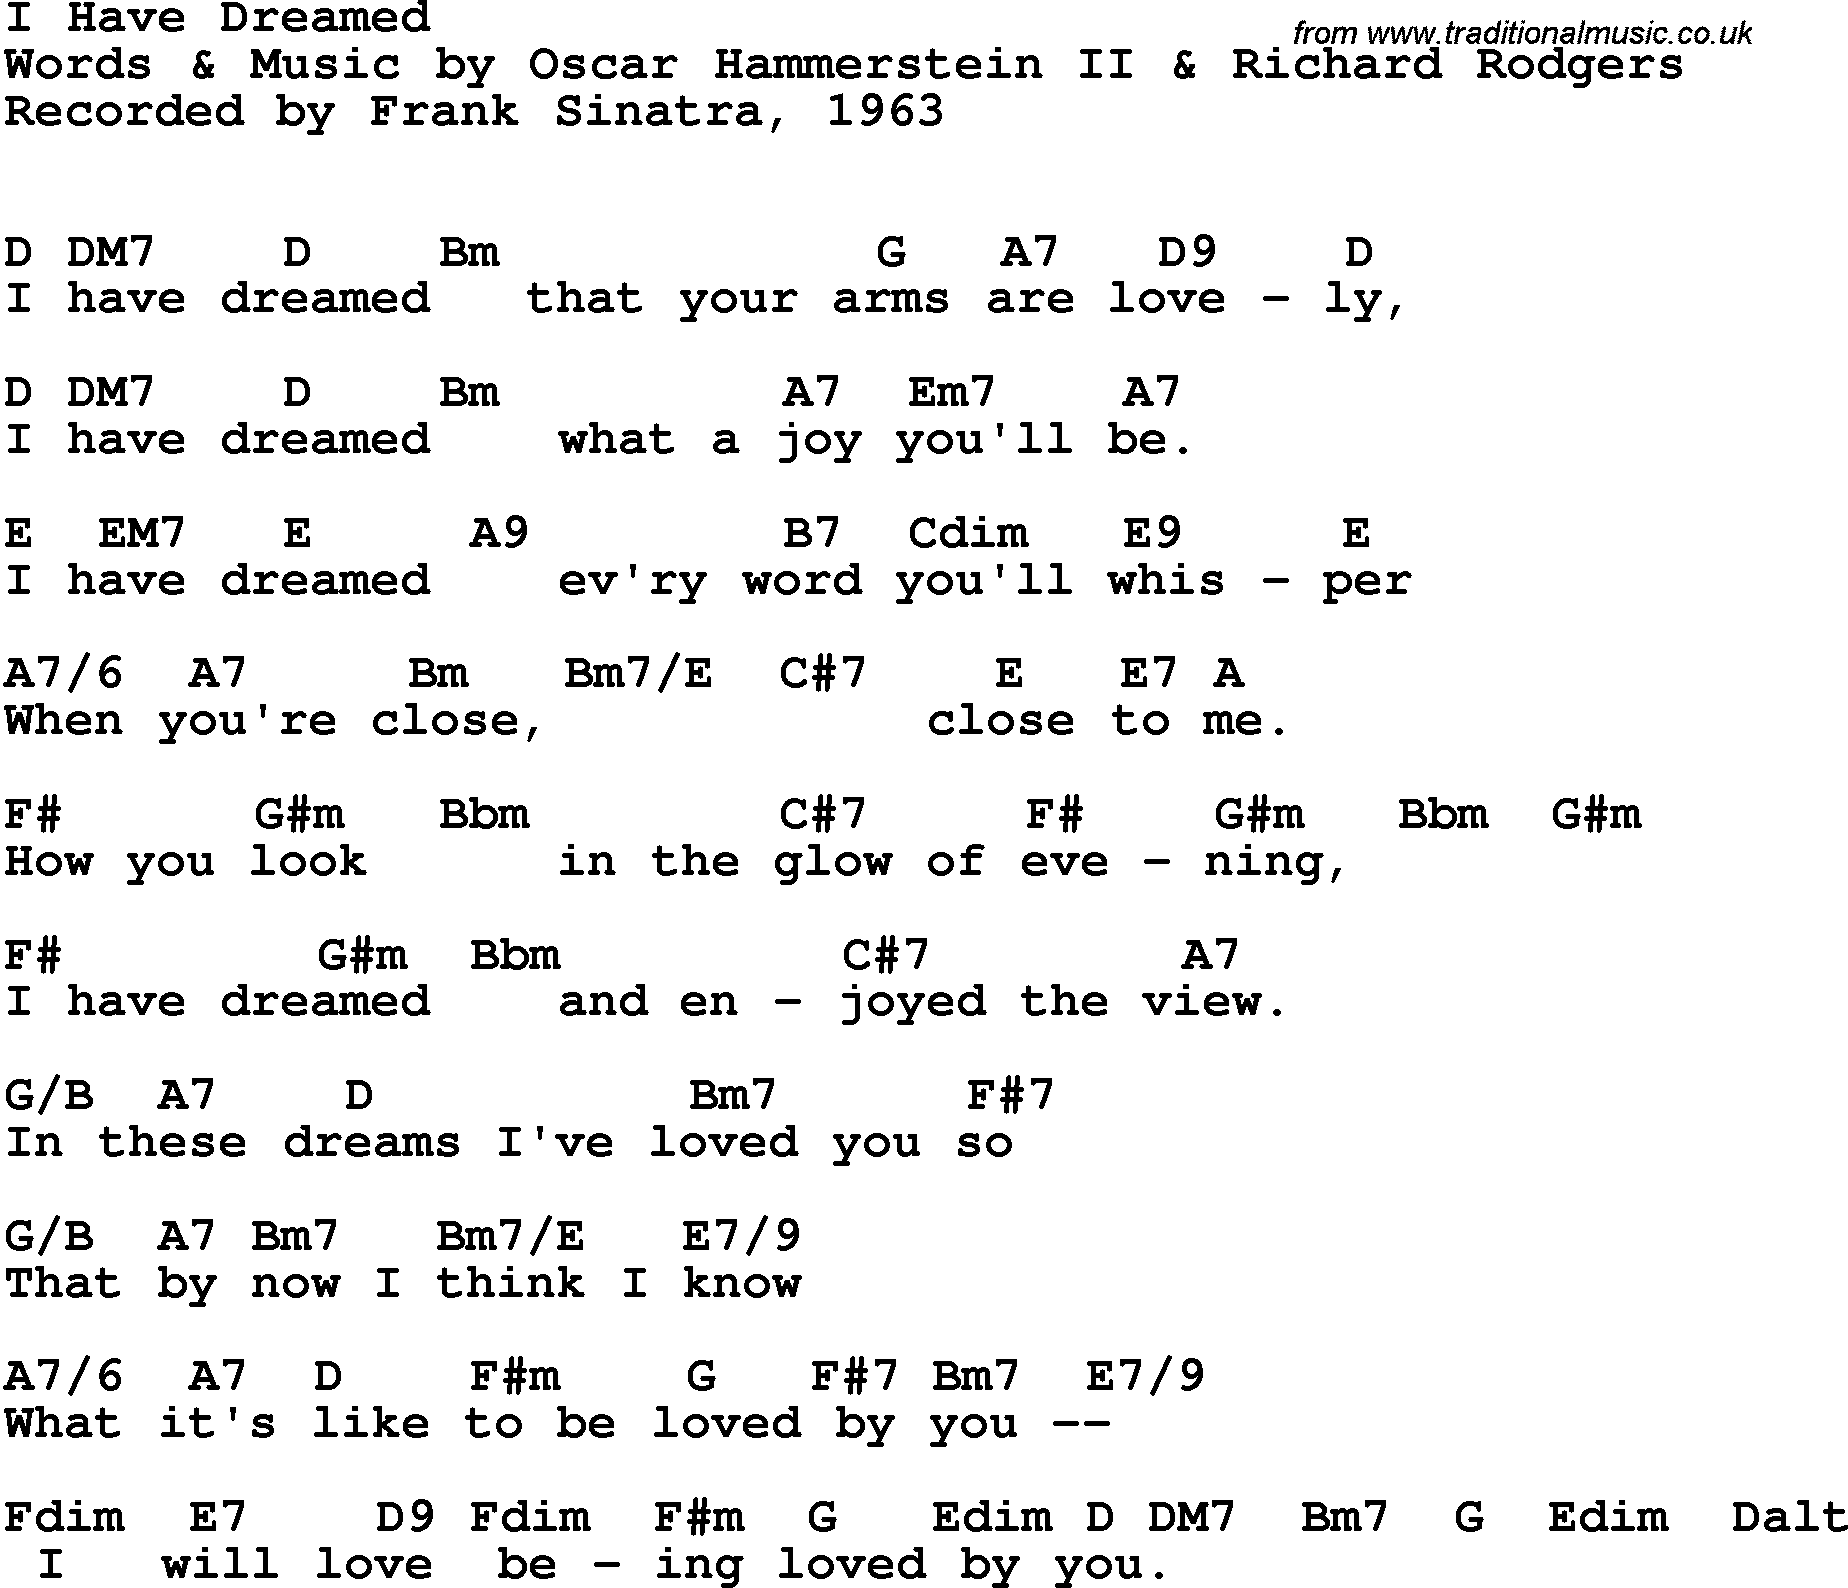 Song Lyrics with guitar chords for I Have Dreamed - Frank Sinatra, 1963